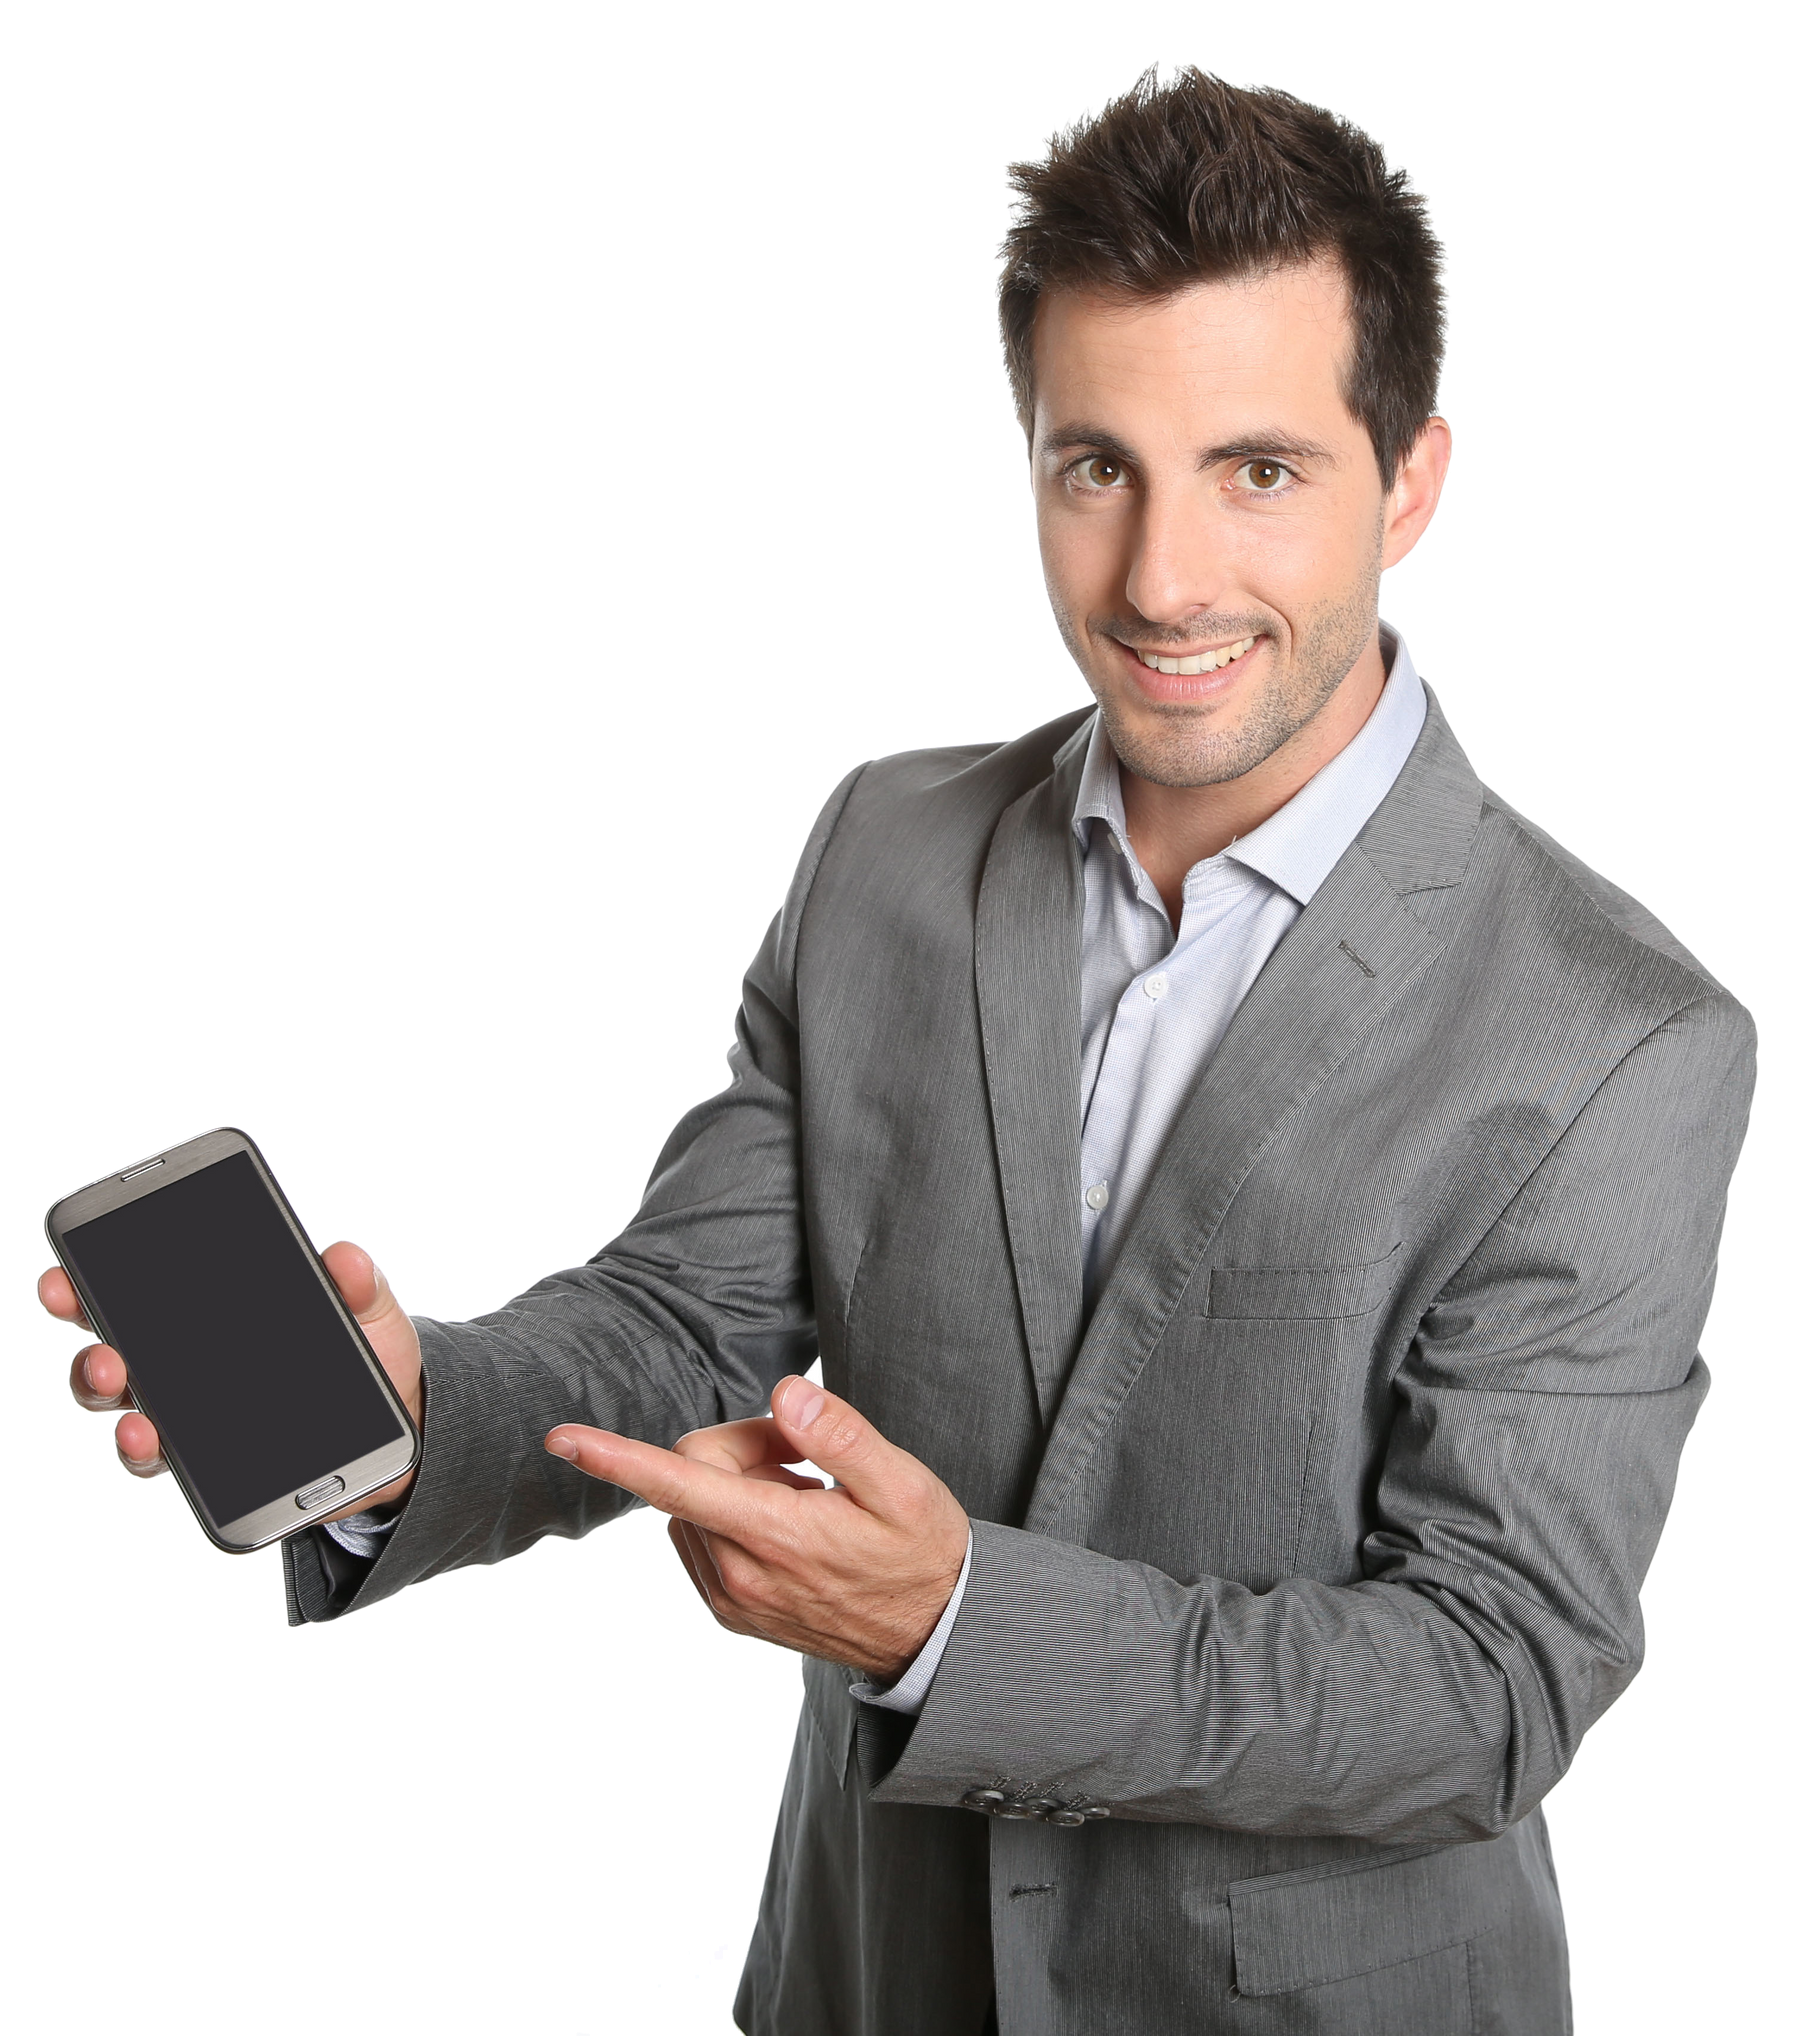 a man in a suit is holding a cell phone and pointing at it